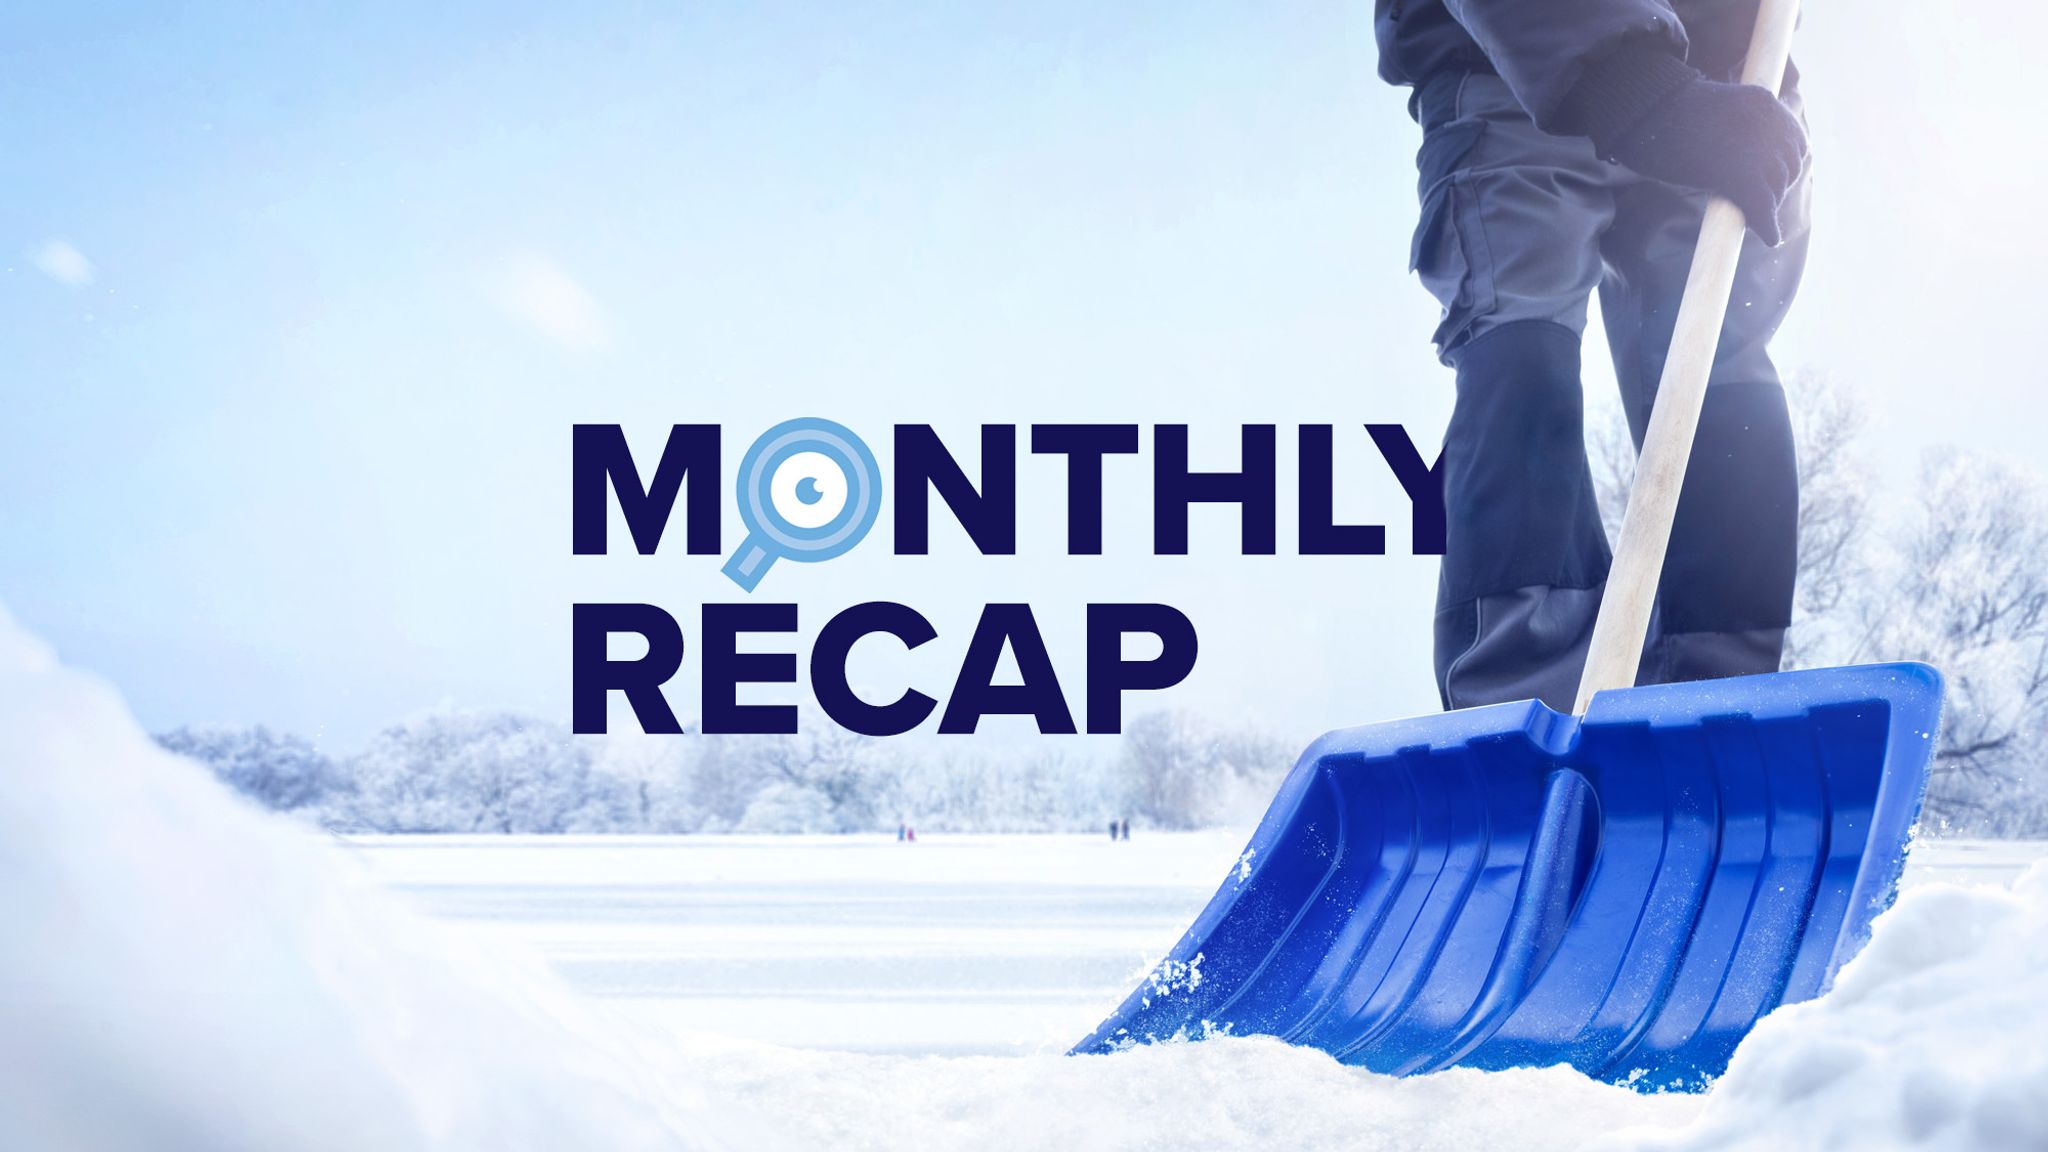 Image of CMS Critic Monthly Recap logo against a photo of a man shoveling snow